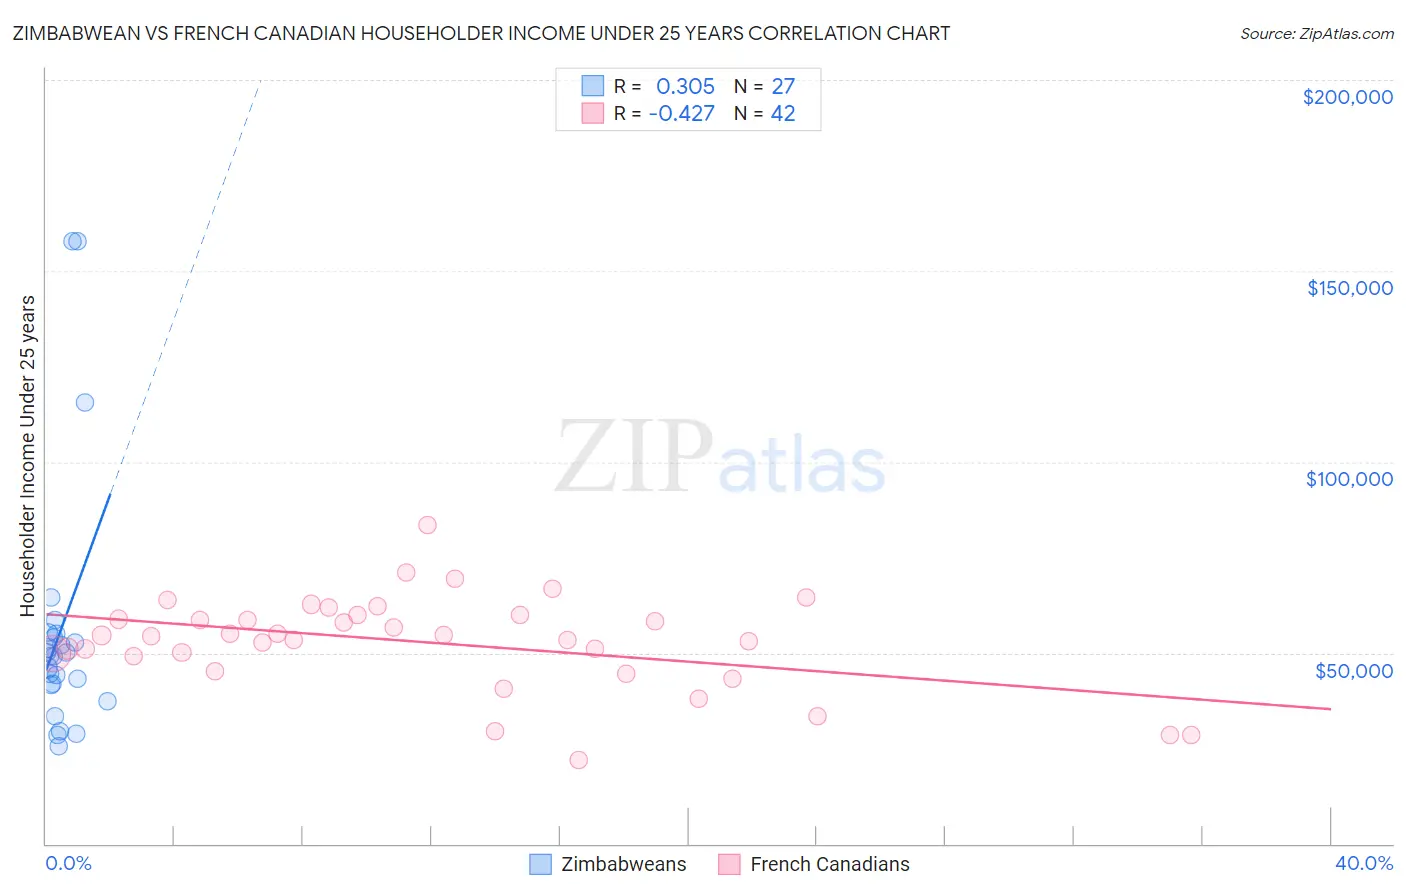 Zimbabwean vs French Canadian Householder Income Under 25 years